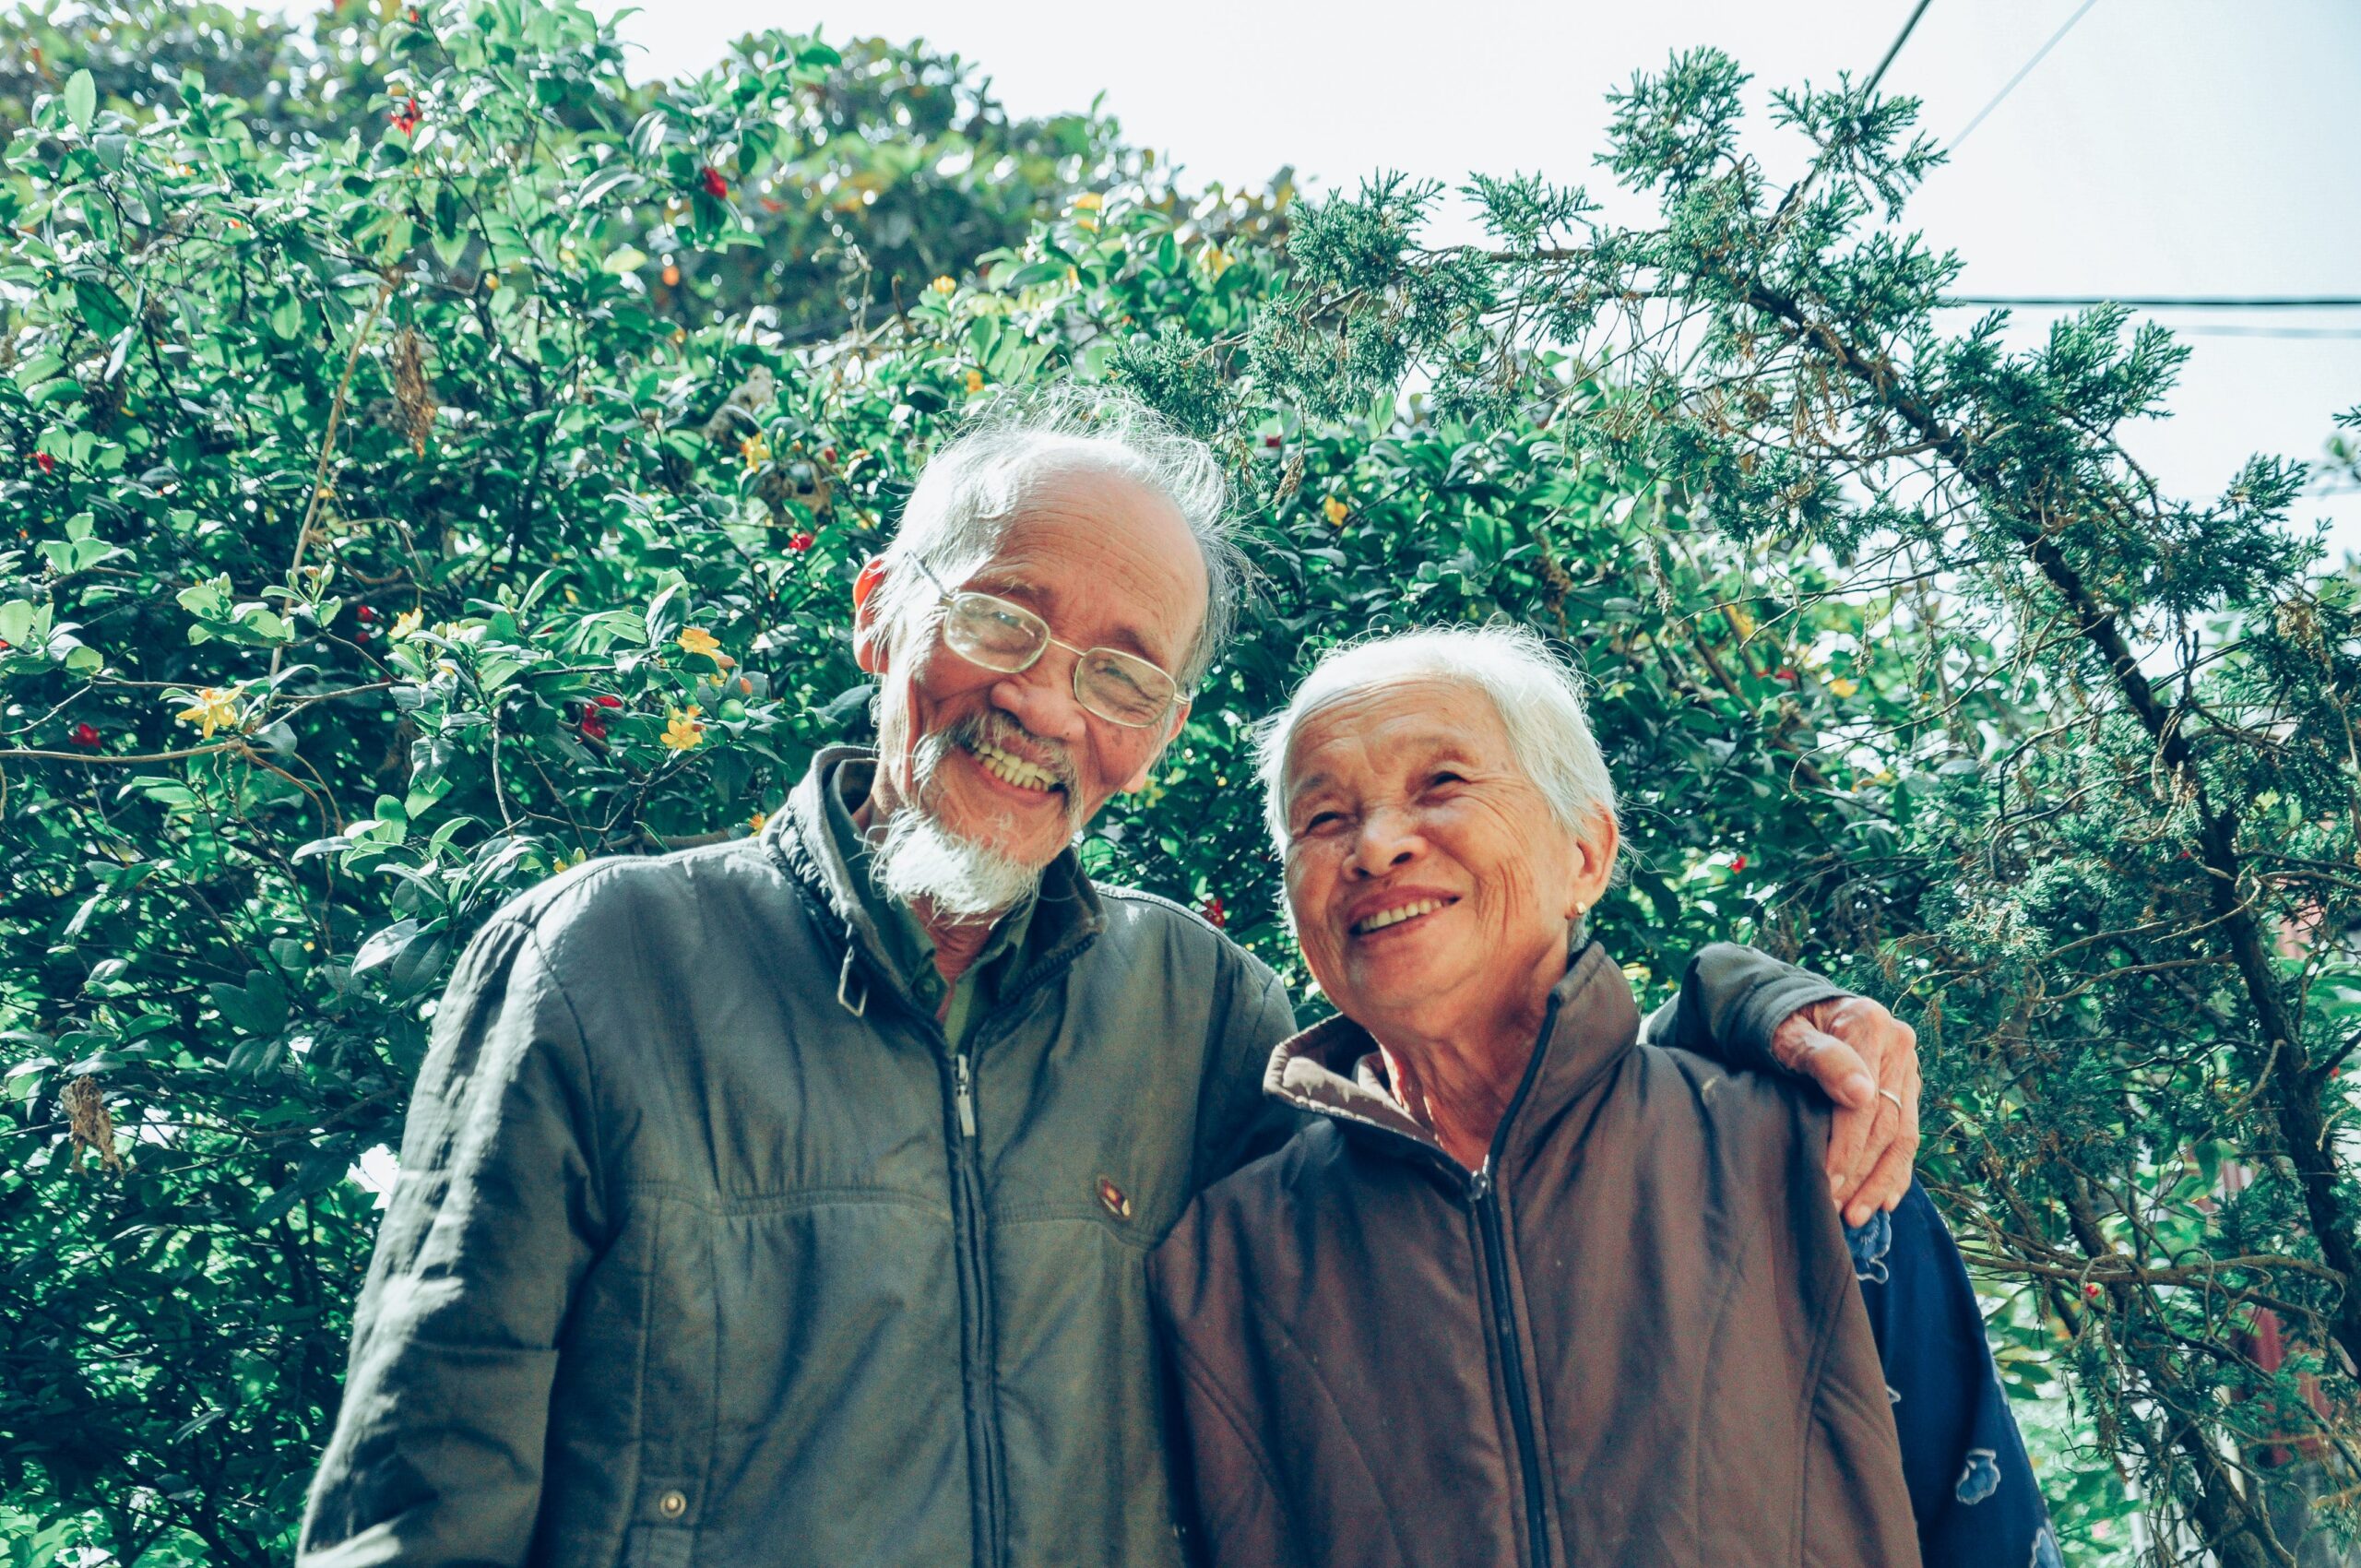 older man with arm around smiling older woman standing in front of trees